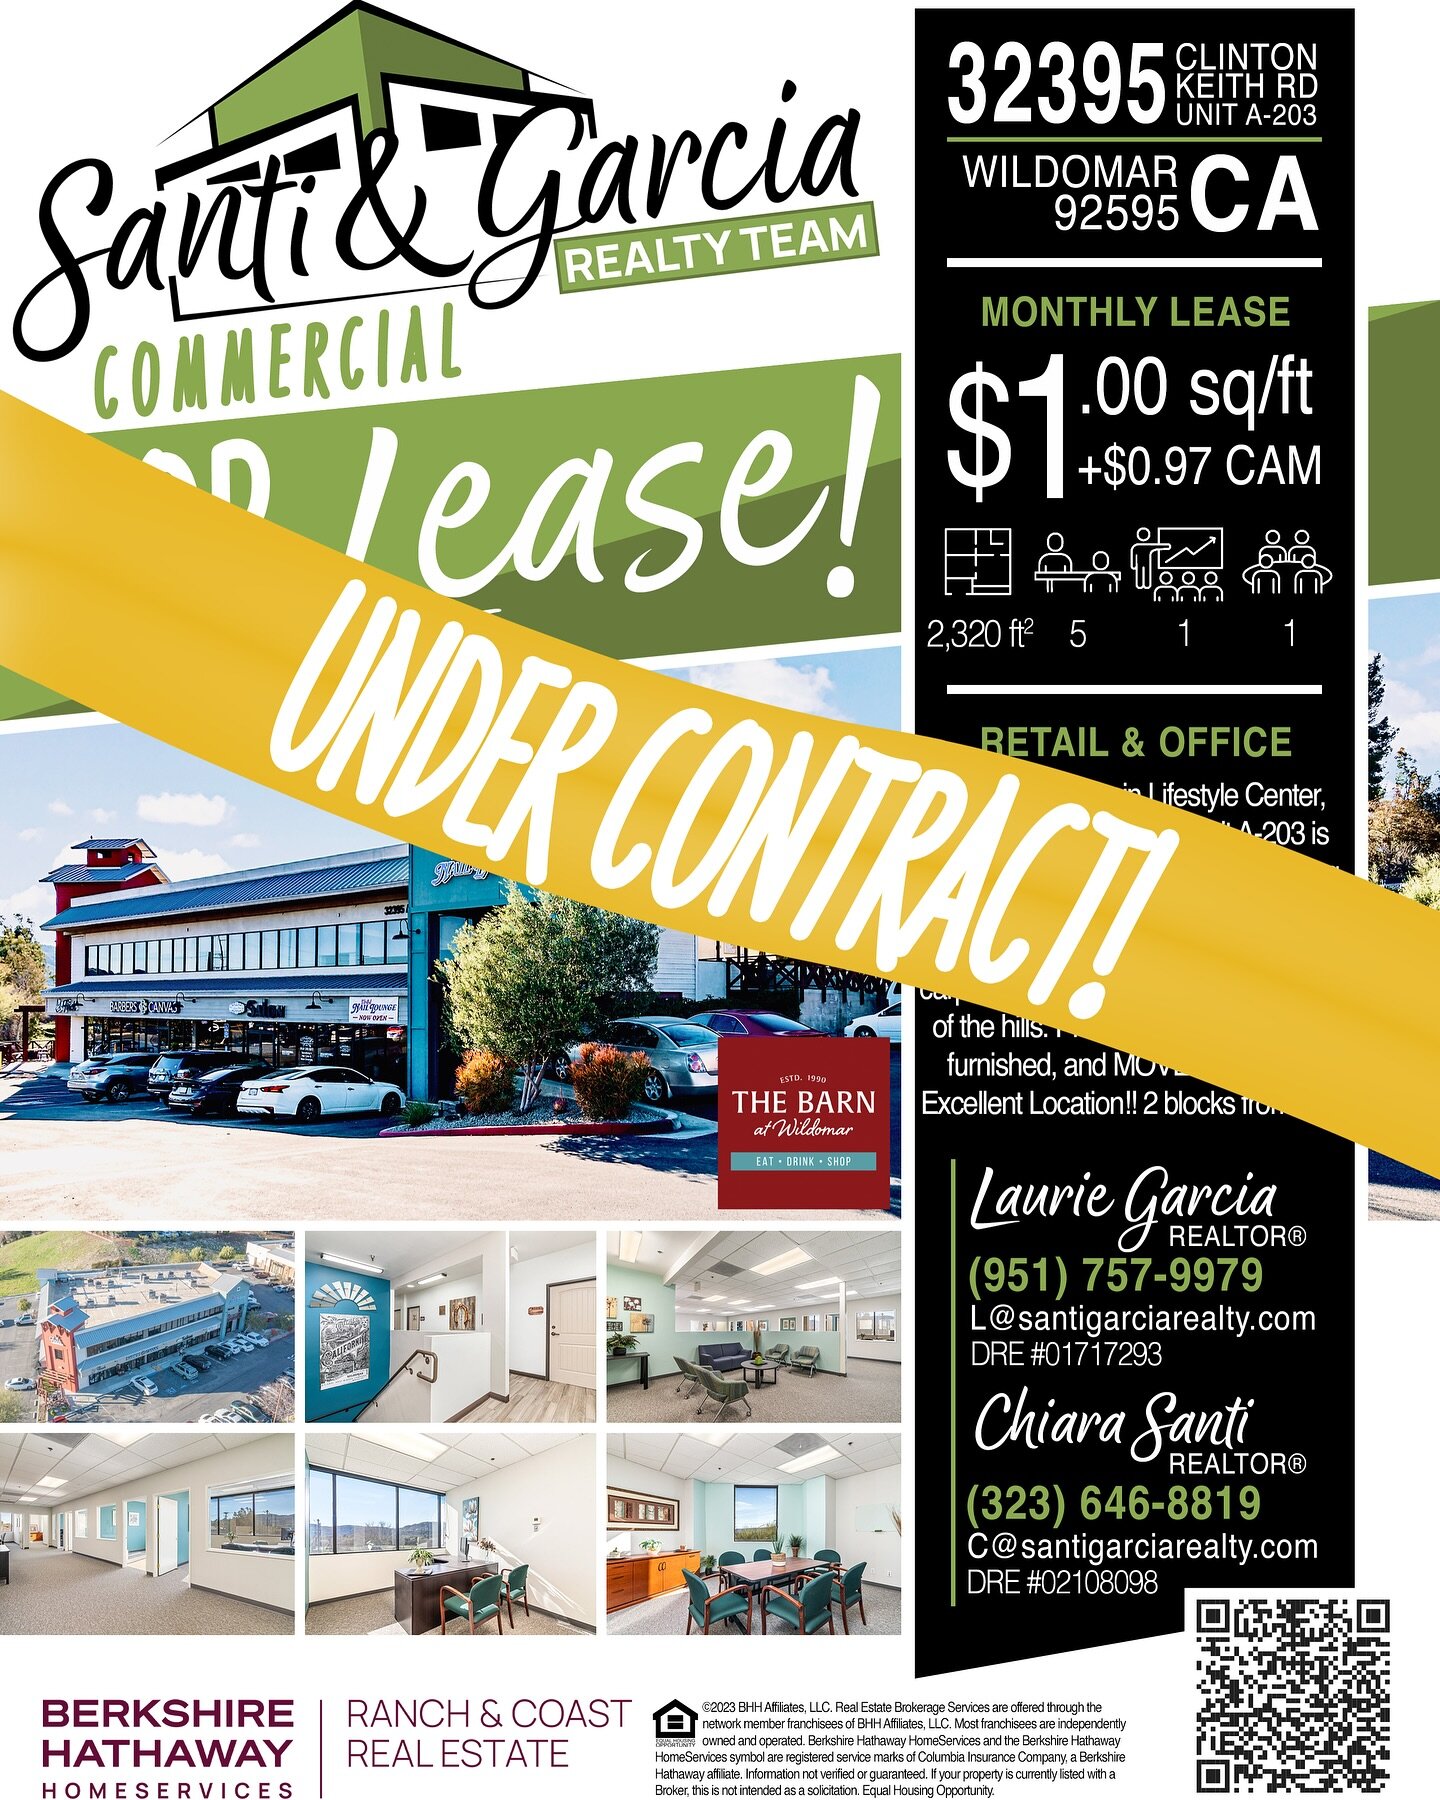 📄✍️UNDER CONTRACT‼️ That was QUICK! 👏👏👏

📍32395 Clinton Keith Rd, Unit A-203, Wildomar, CA. 92595

👉More info at santigarciarealty.com

#SantiGarciaRealty #realestate #realtor #realty #carealestategroup #commercialrealestate #residentialrealest